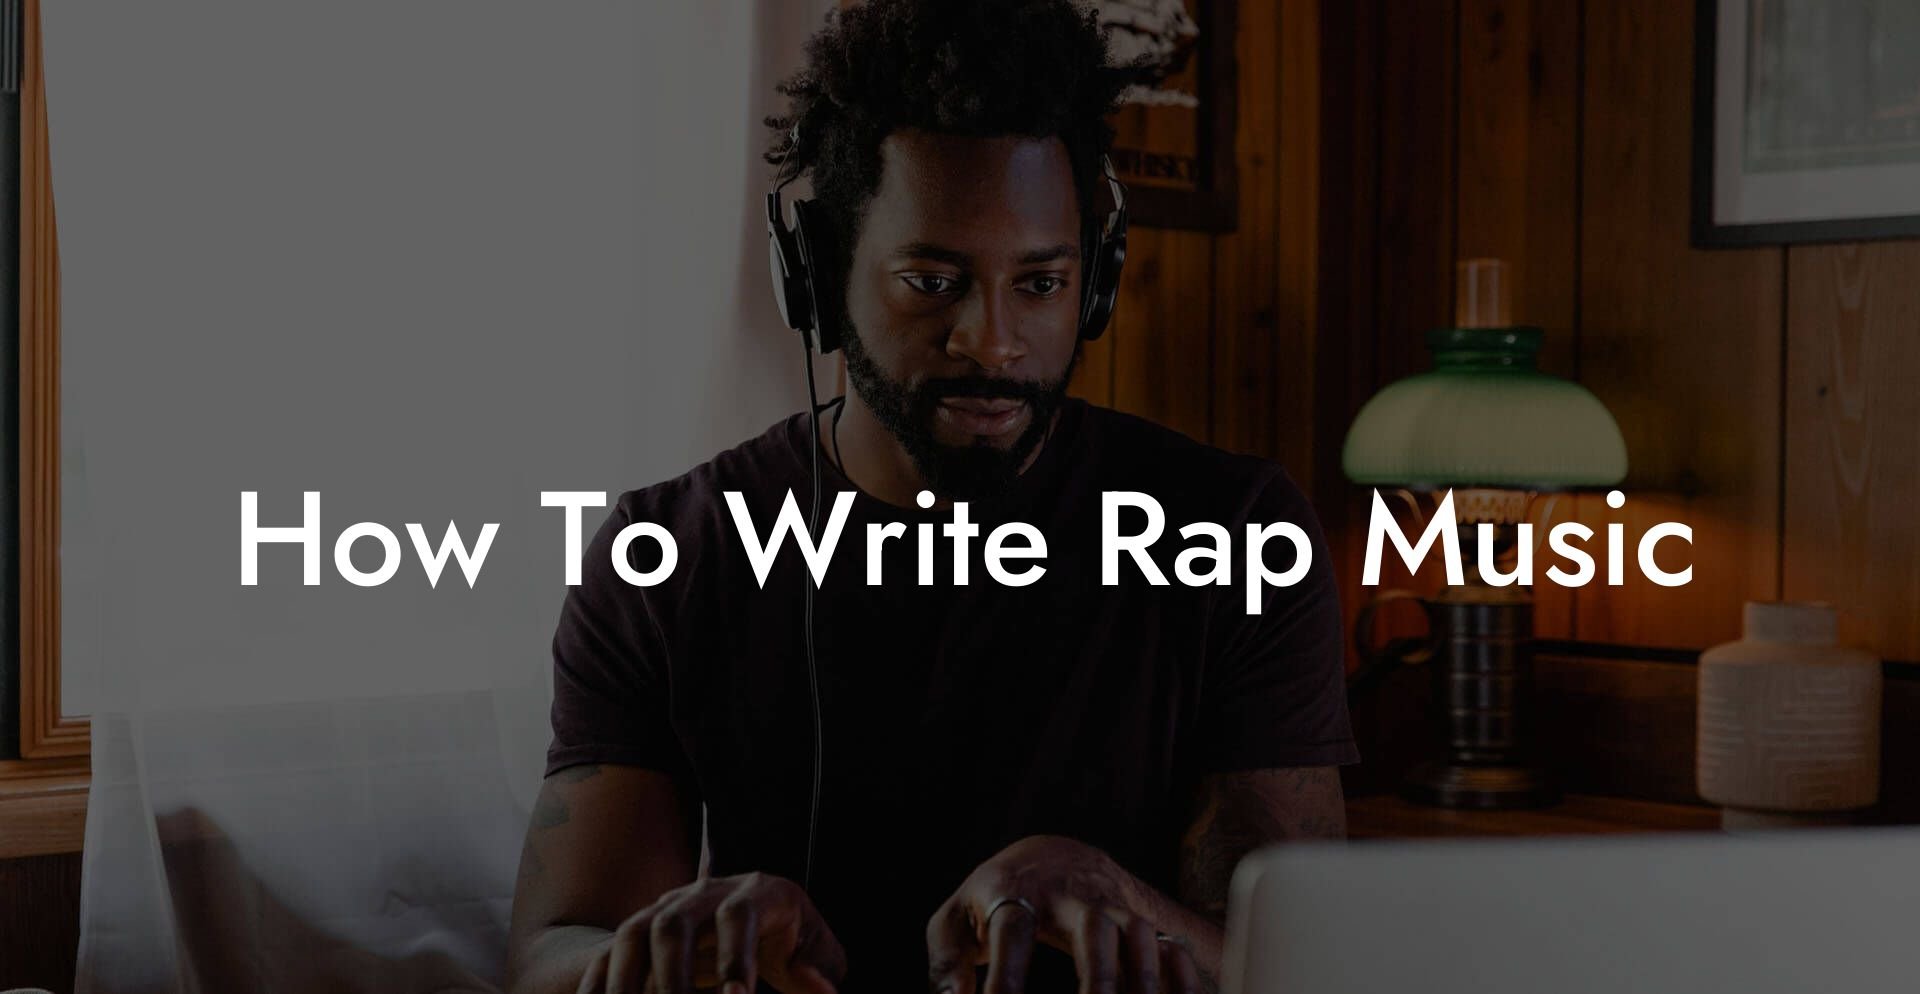 how to write rap music lyric assistant